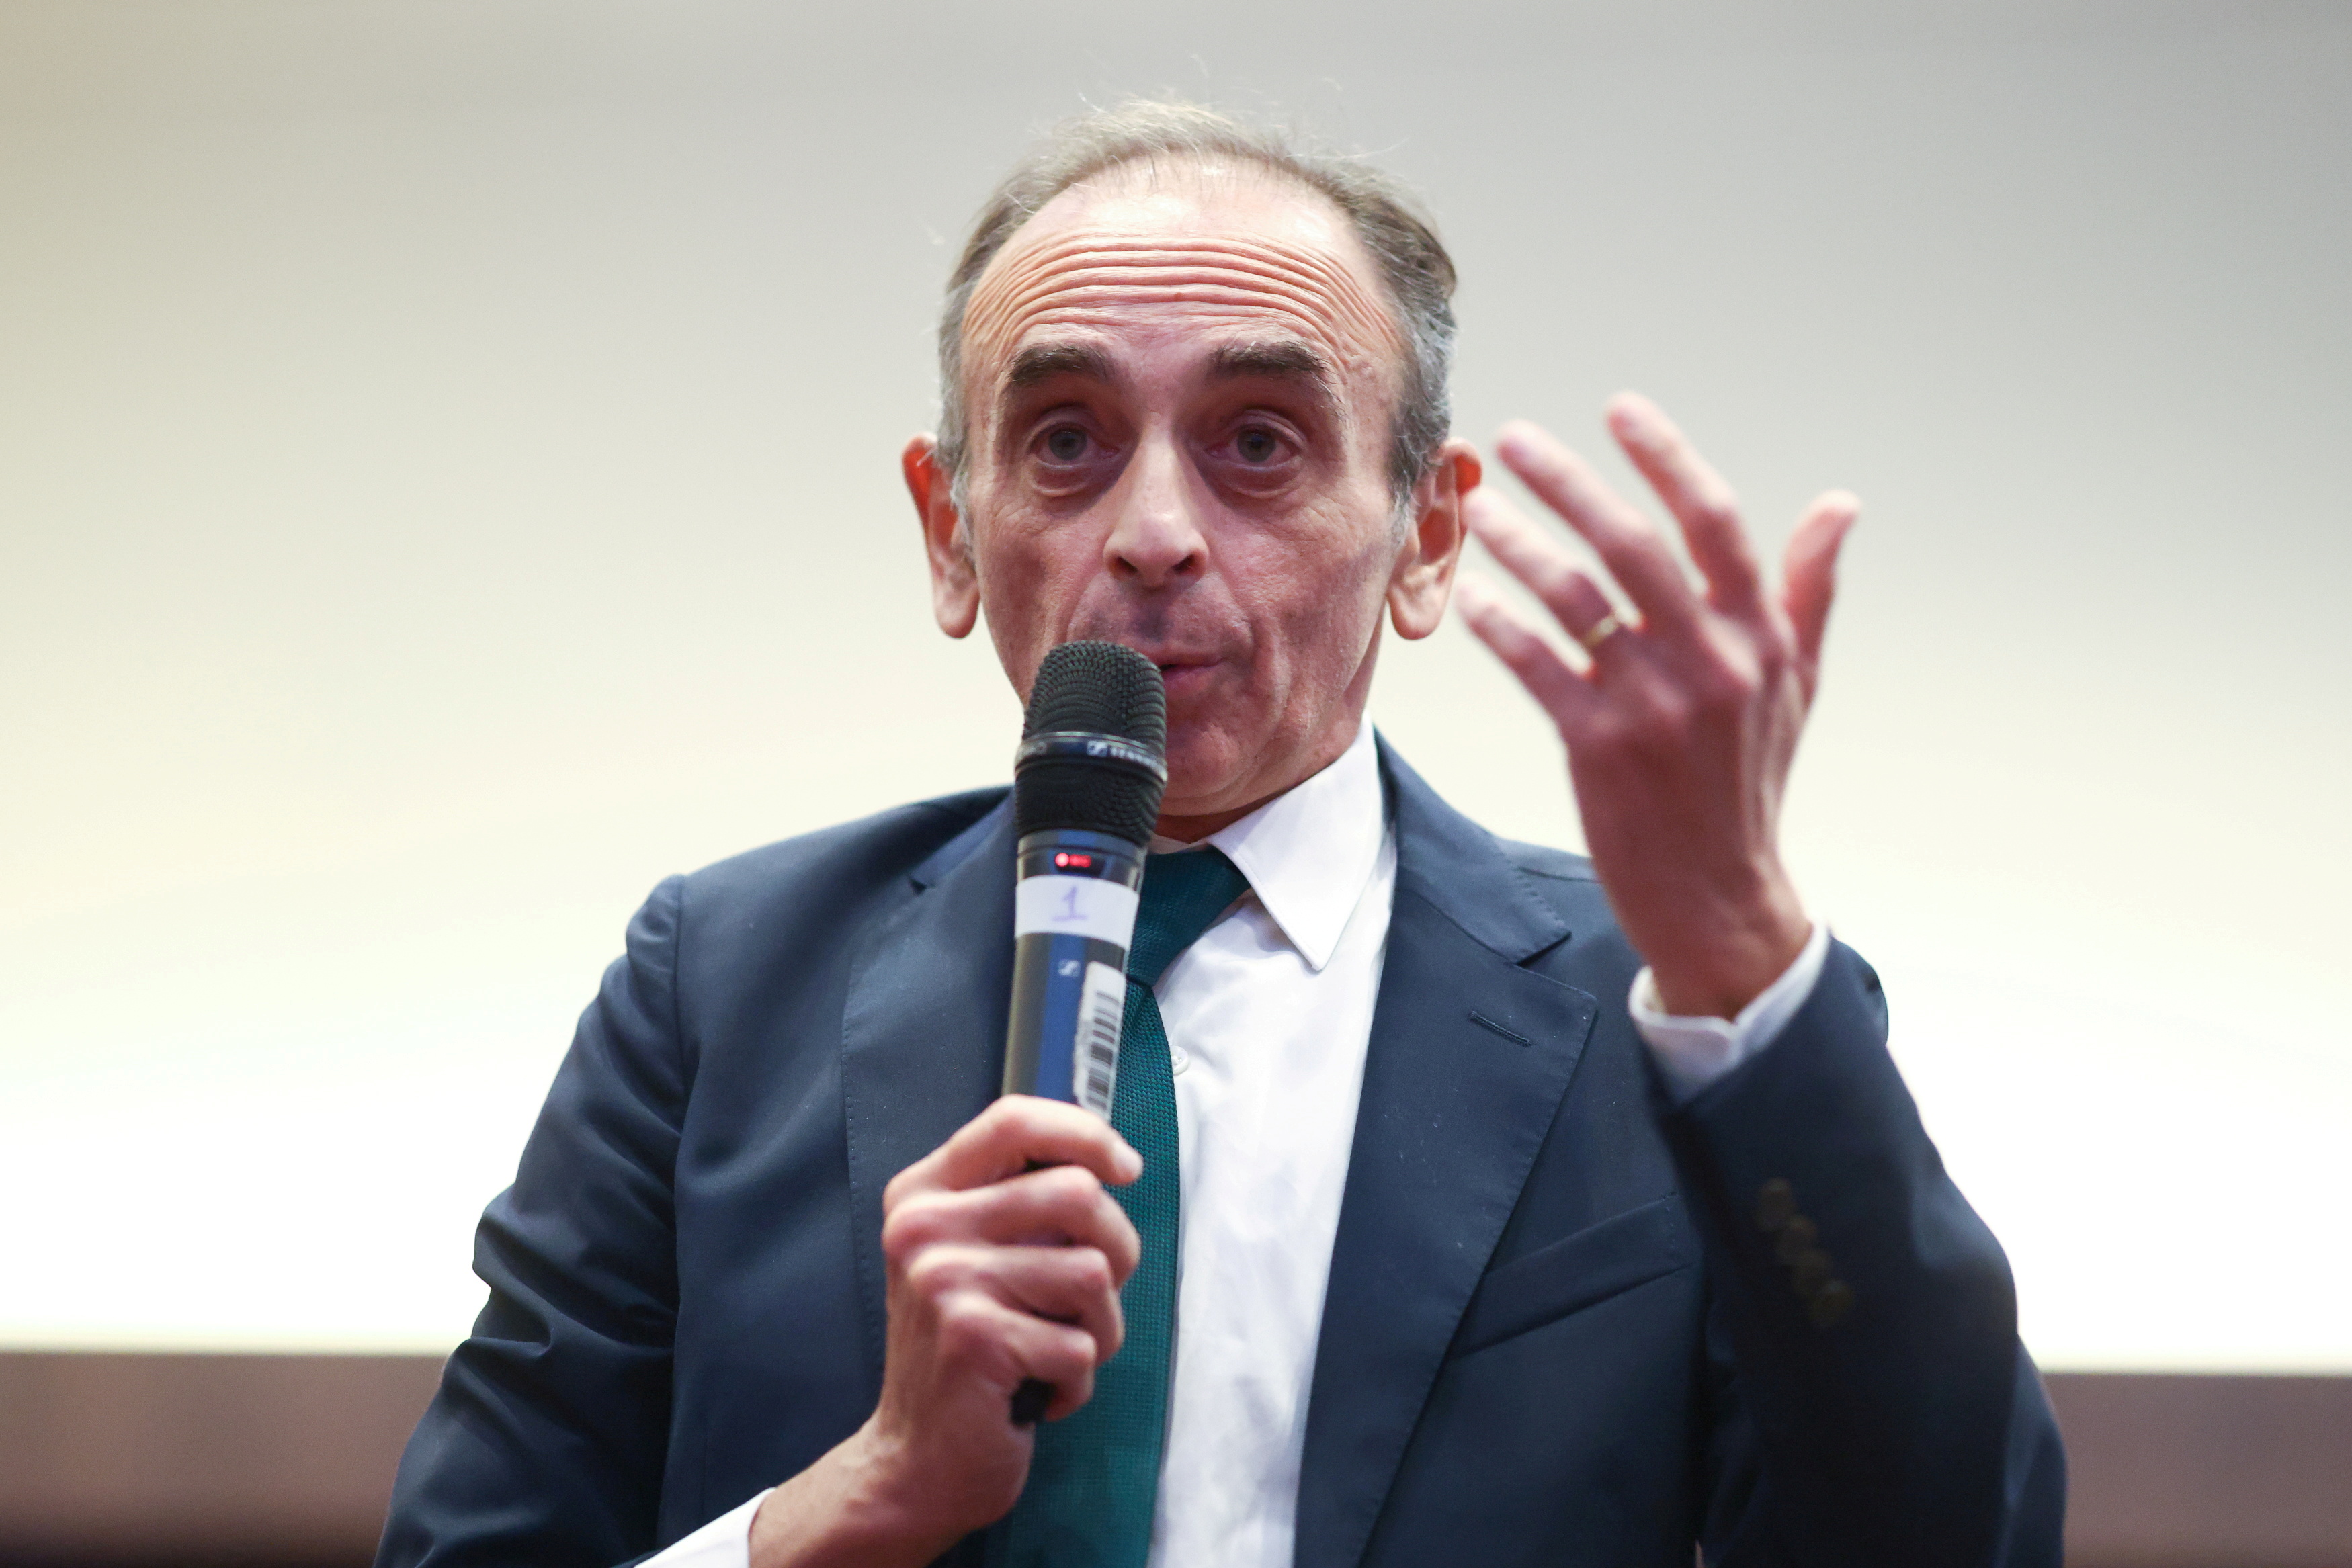 French right-wing commentator Eric Zemmour speaks at an event at the ILEC conference centre, London